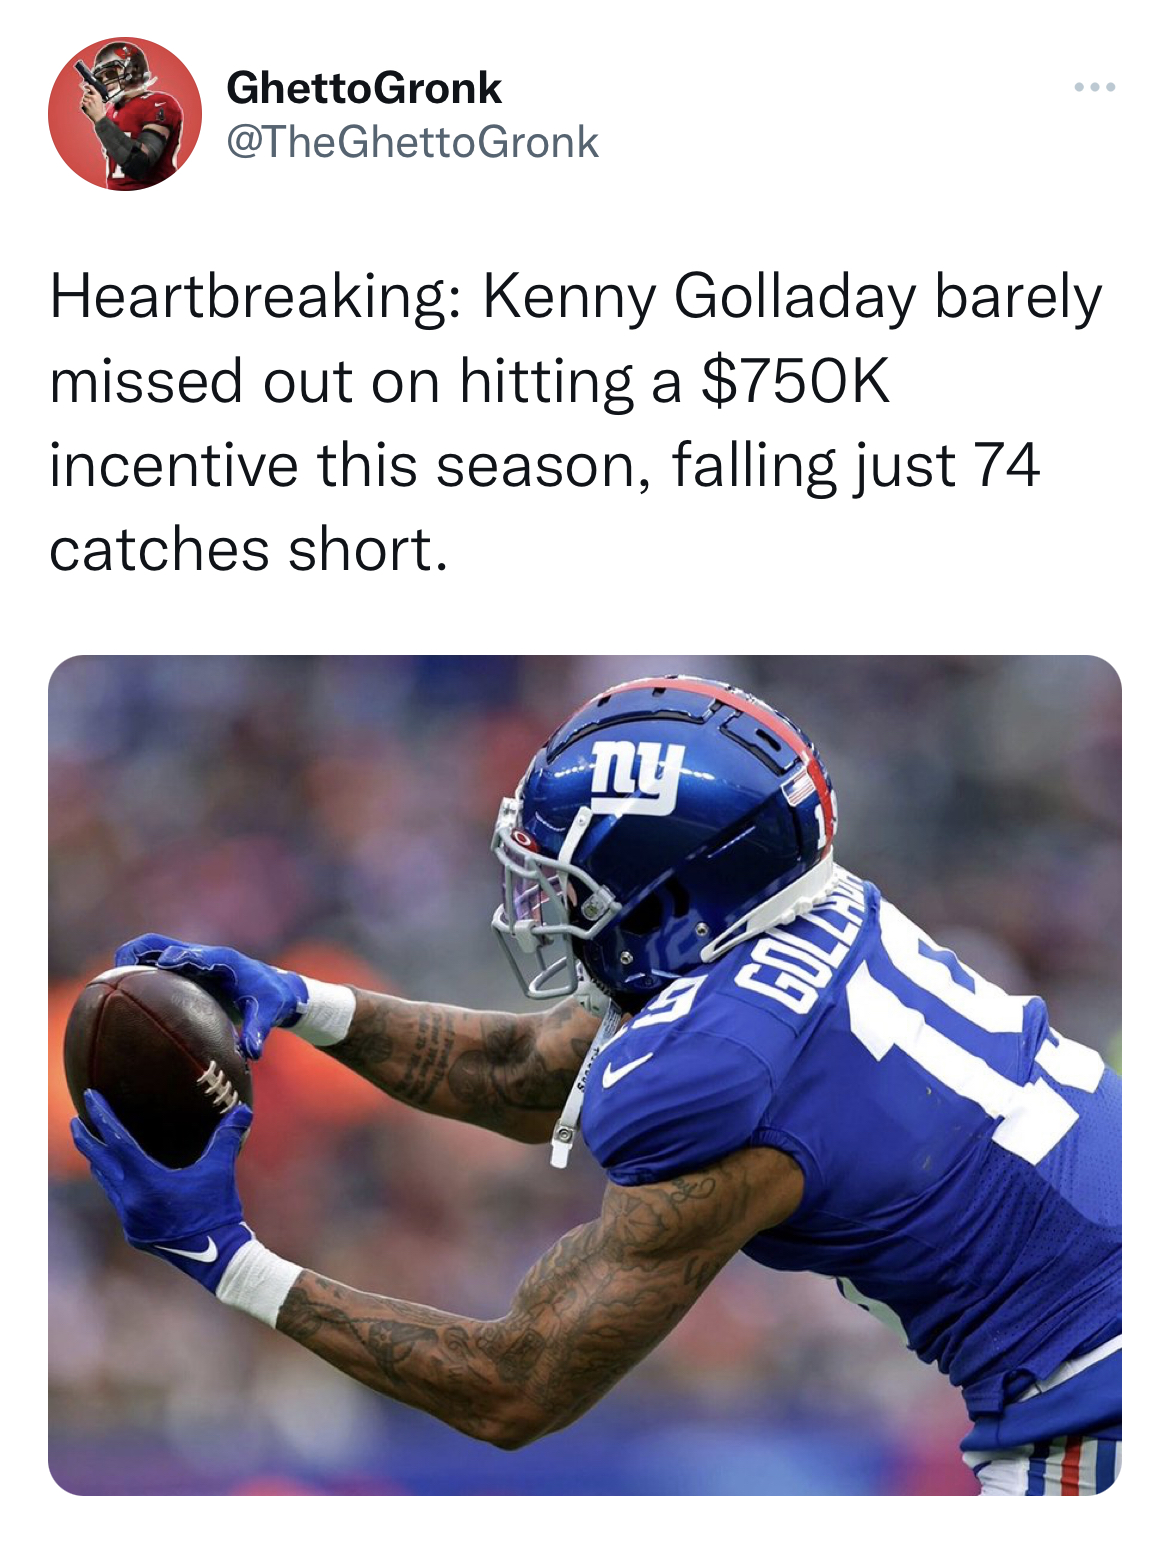 Tweets dunking on celebs - kenny golladay giants - Ghetto Gronk Heartbreaking Kenny Golladay barely. missed out on hitting a $ incentive this season, falling just 74 catches short. ny www 47709 2